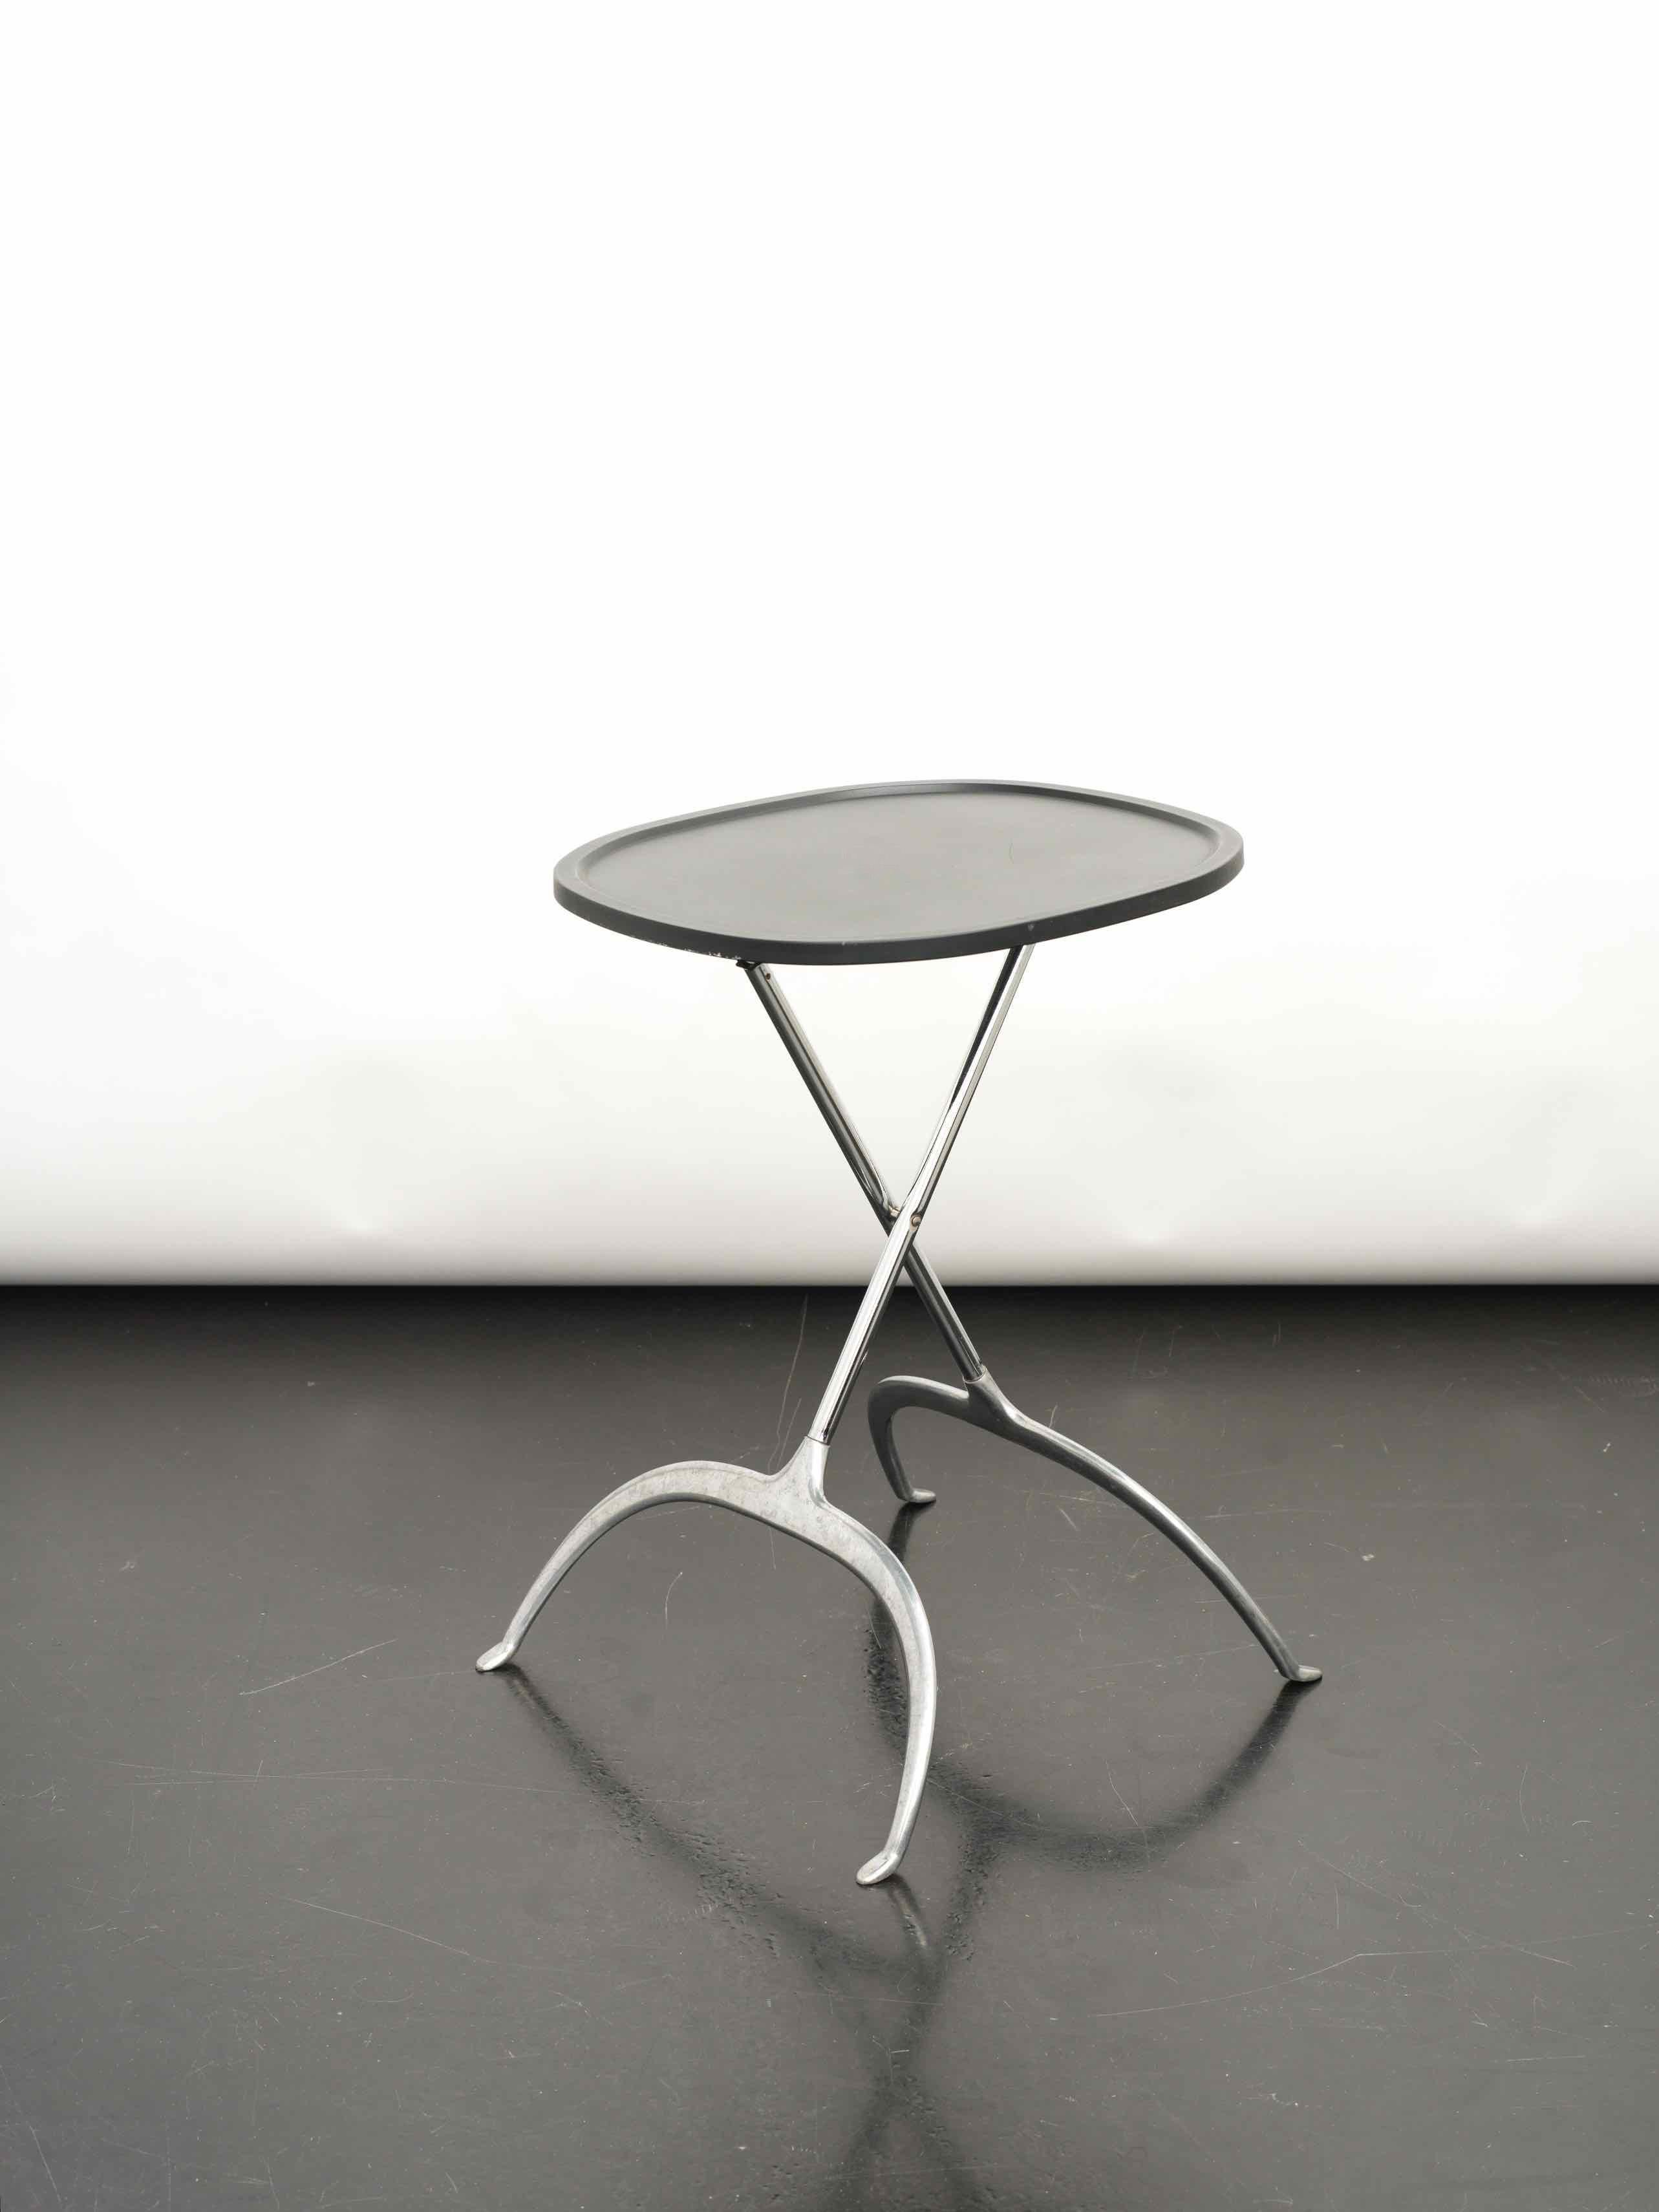 Kartell 'Leopoldo' folding table by Antonio Citterio and Glen Oliver Löw, 19990s.
Occasional folding table made of chrome plated metal and plastic,signed.
Very good vintage condition.